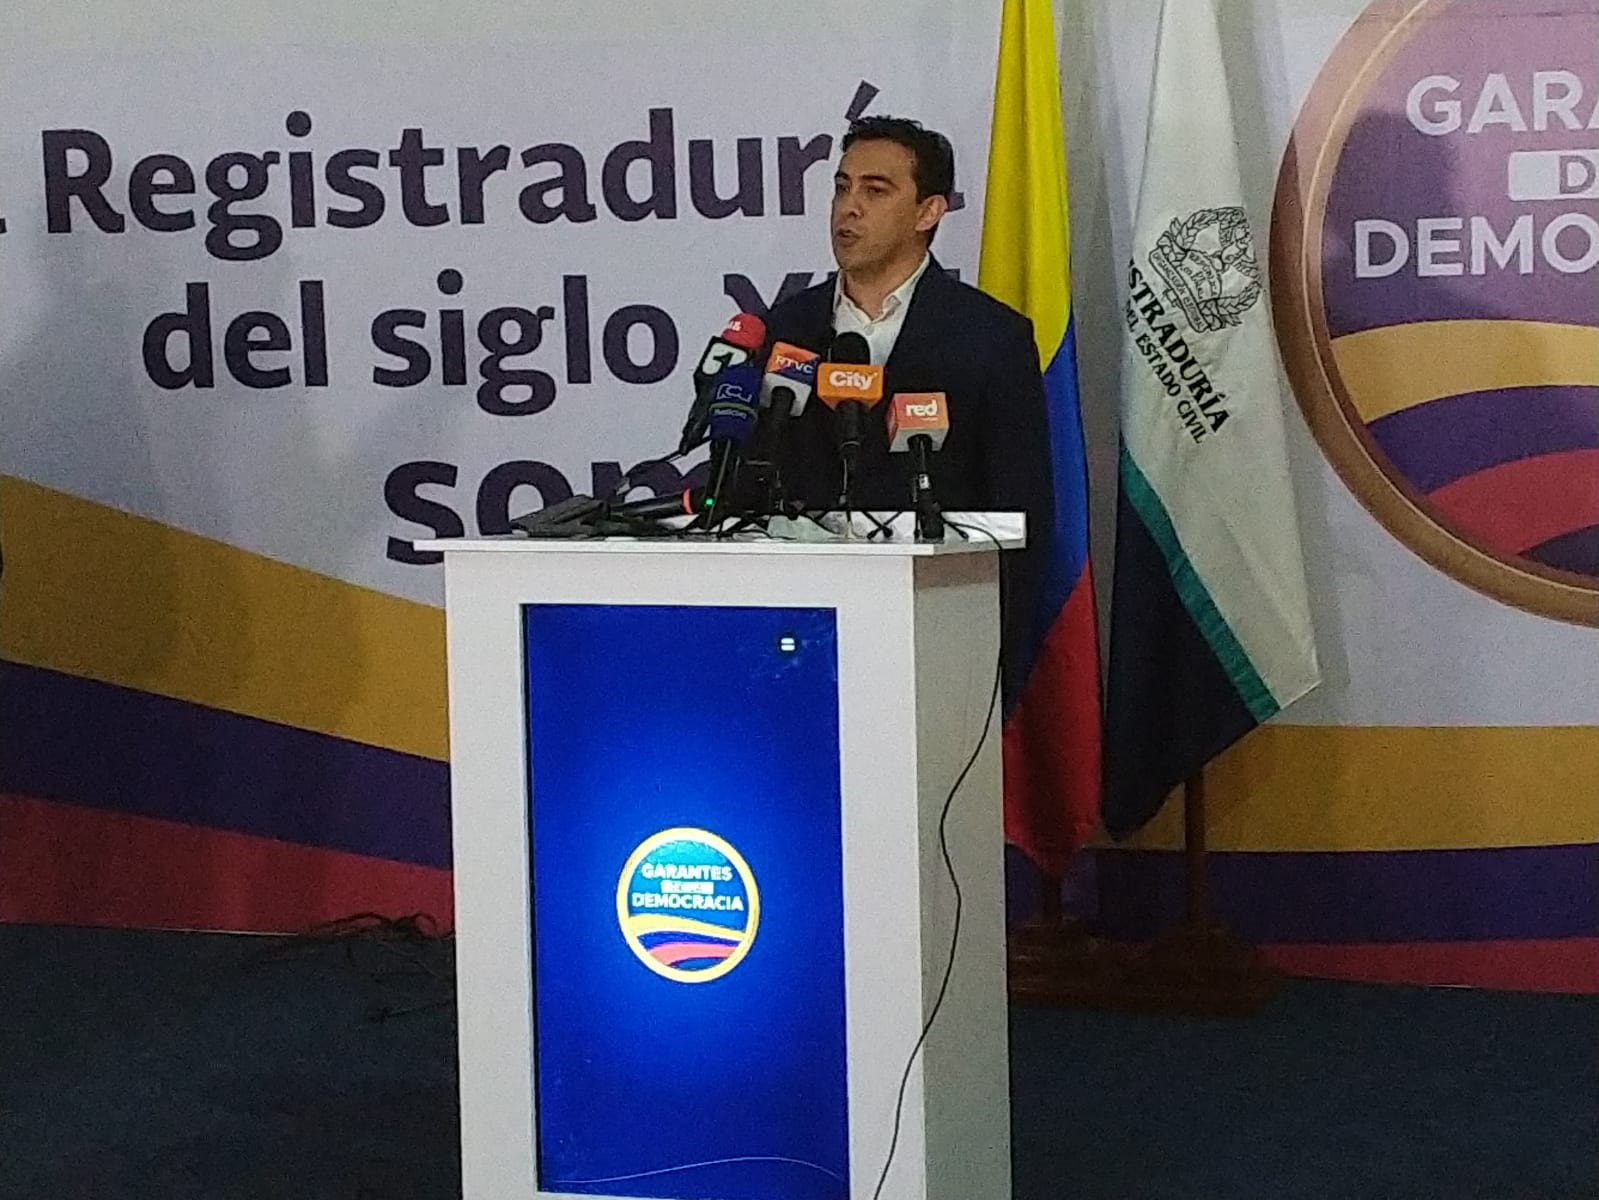 They will investigate the registrar Alexander Vega for possible irregularities in the elections